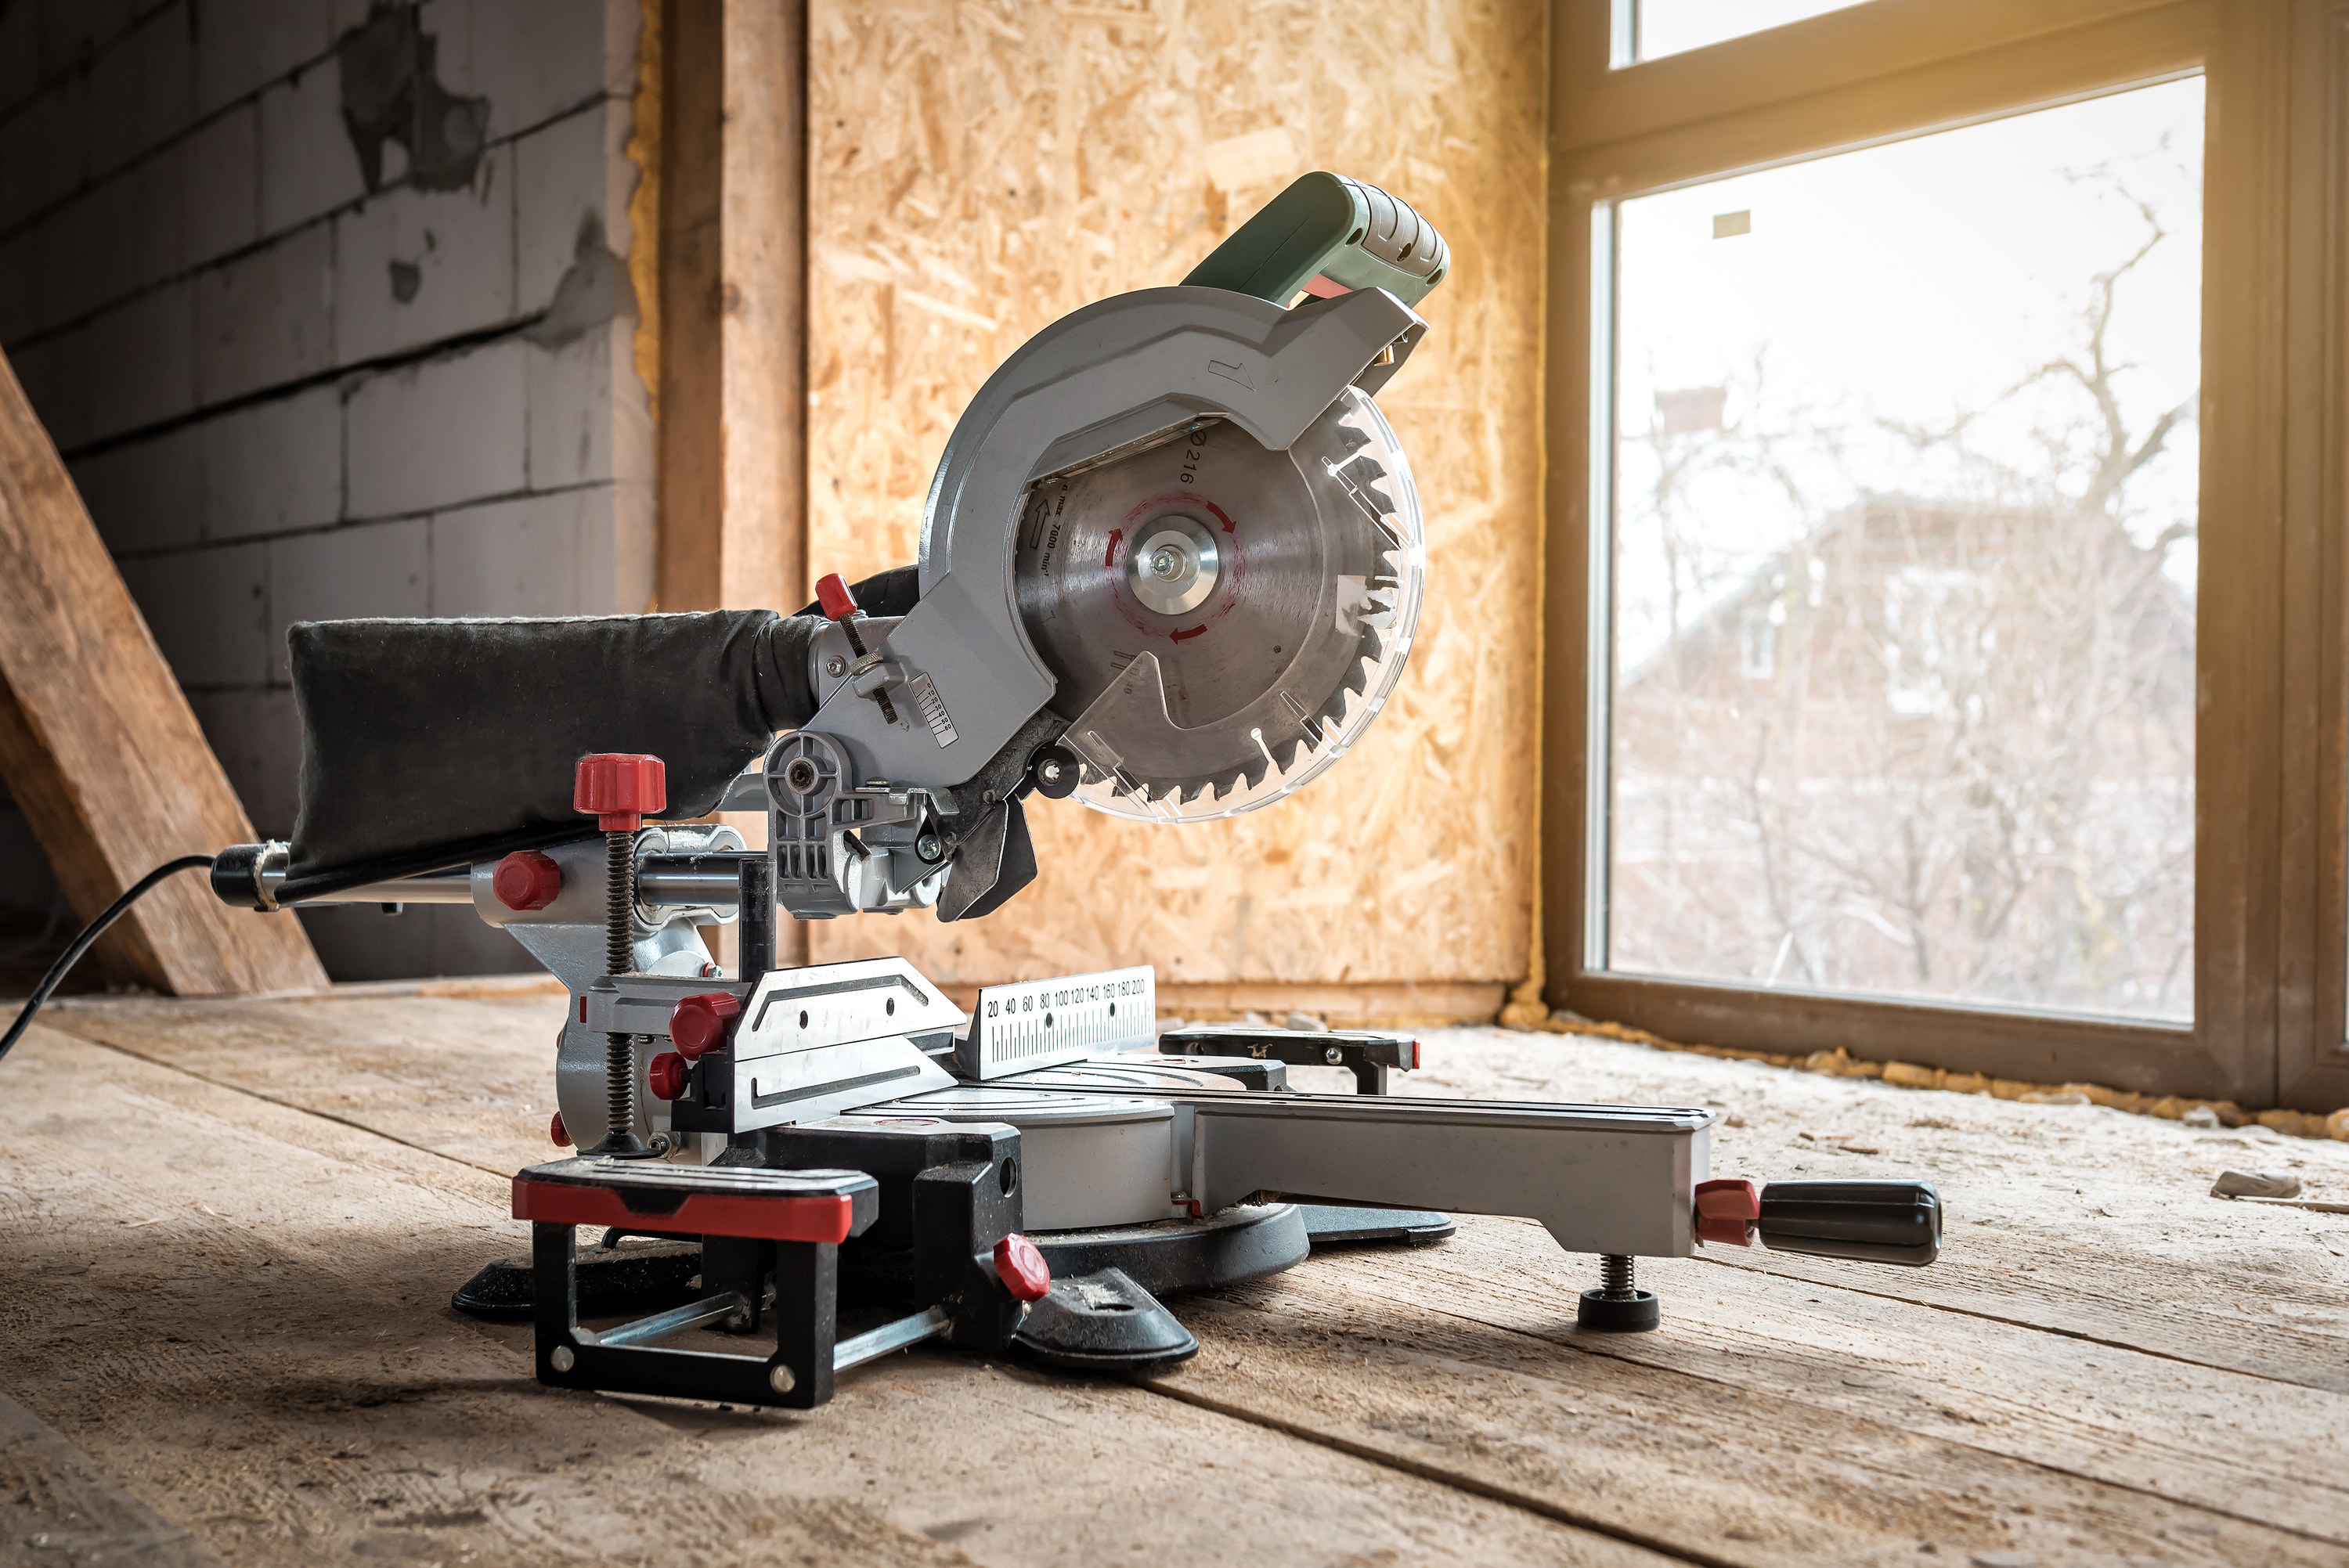 A circular saw on a wood surface